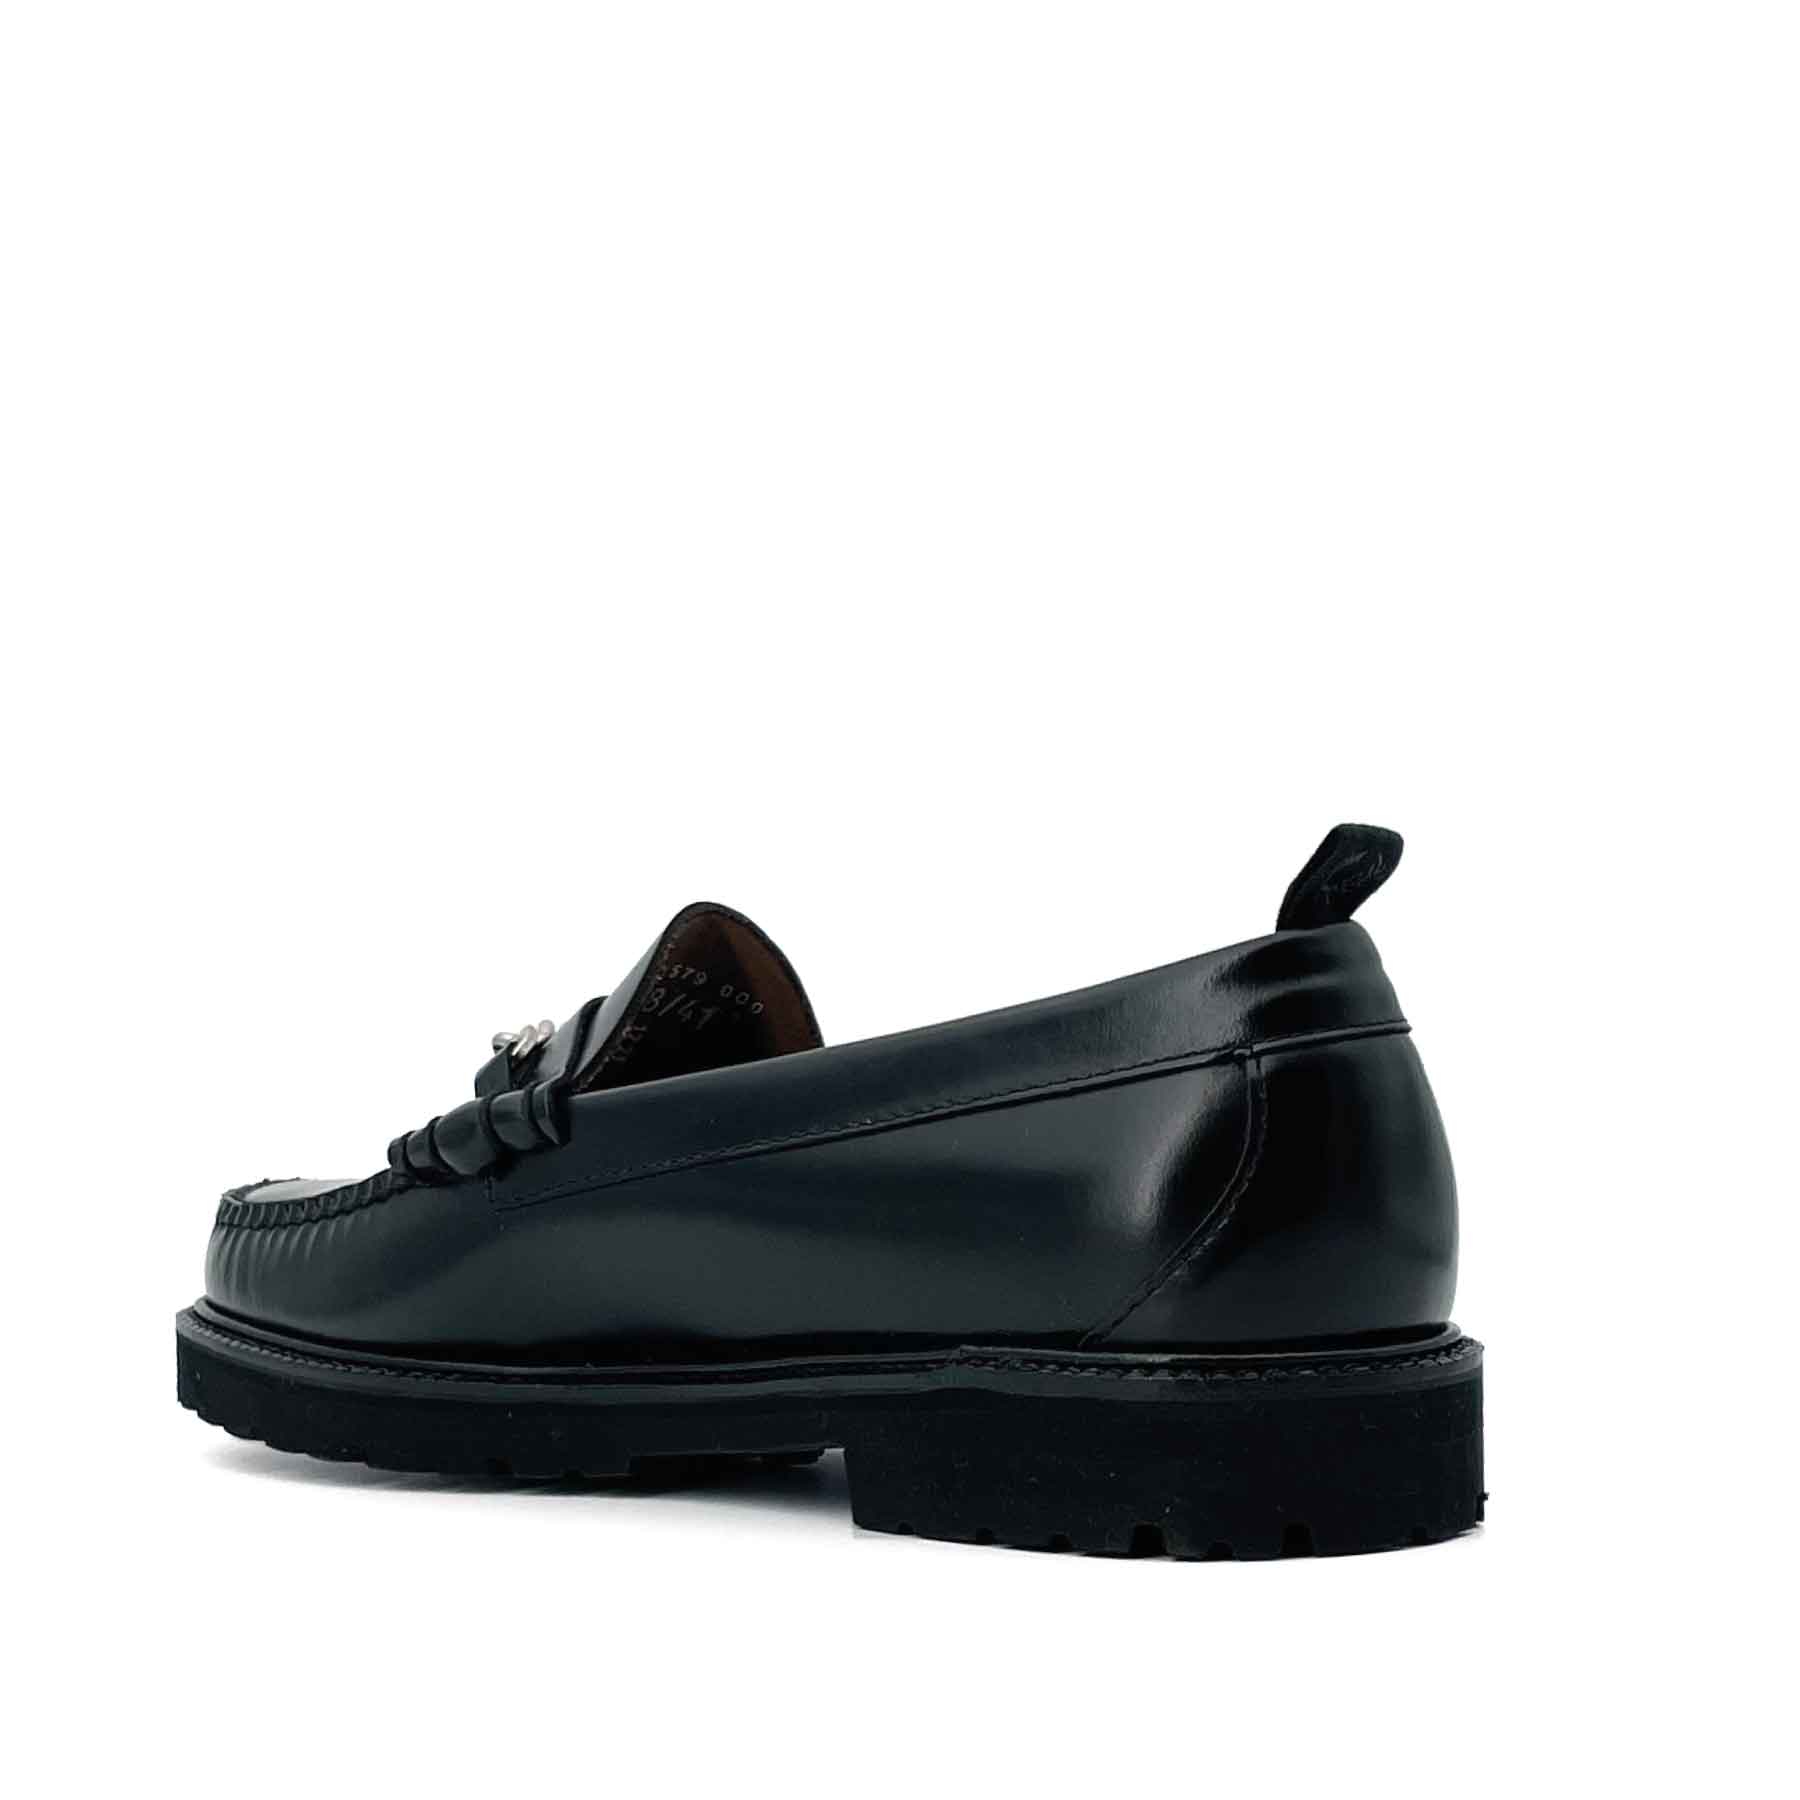 Fred Perry x G.H.BASS. Black W